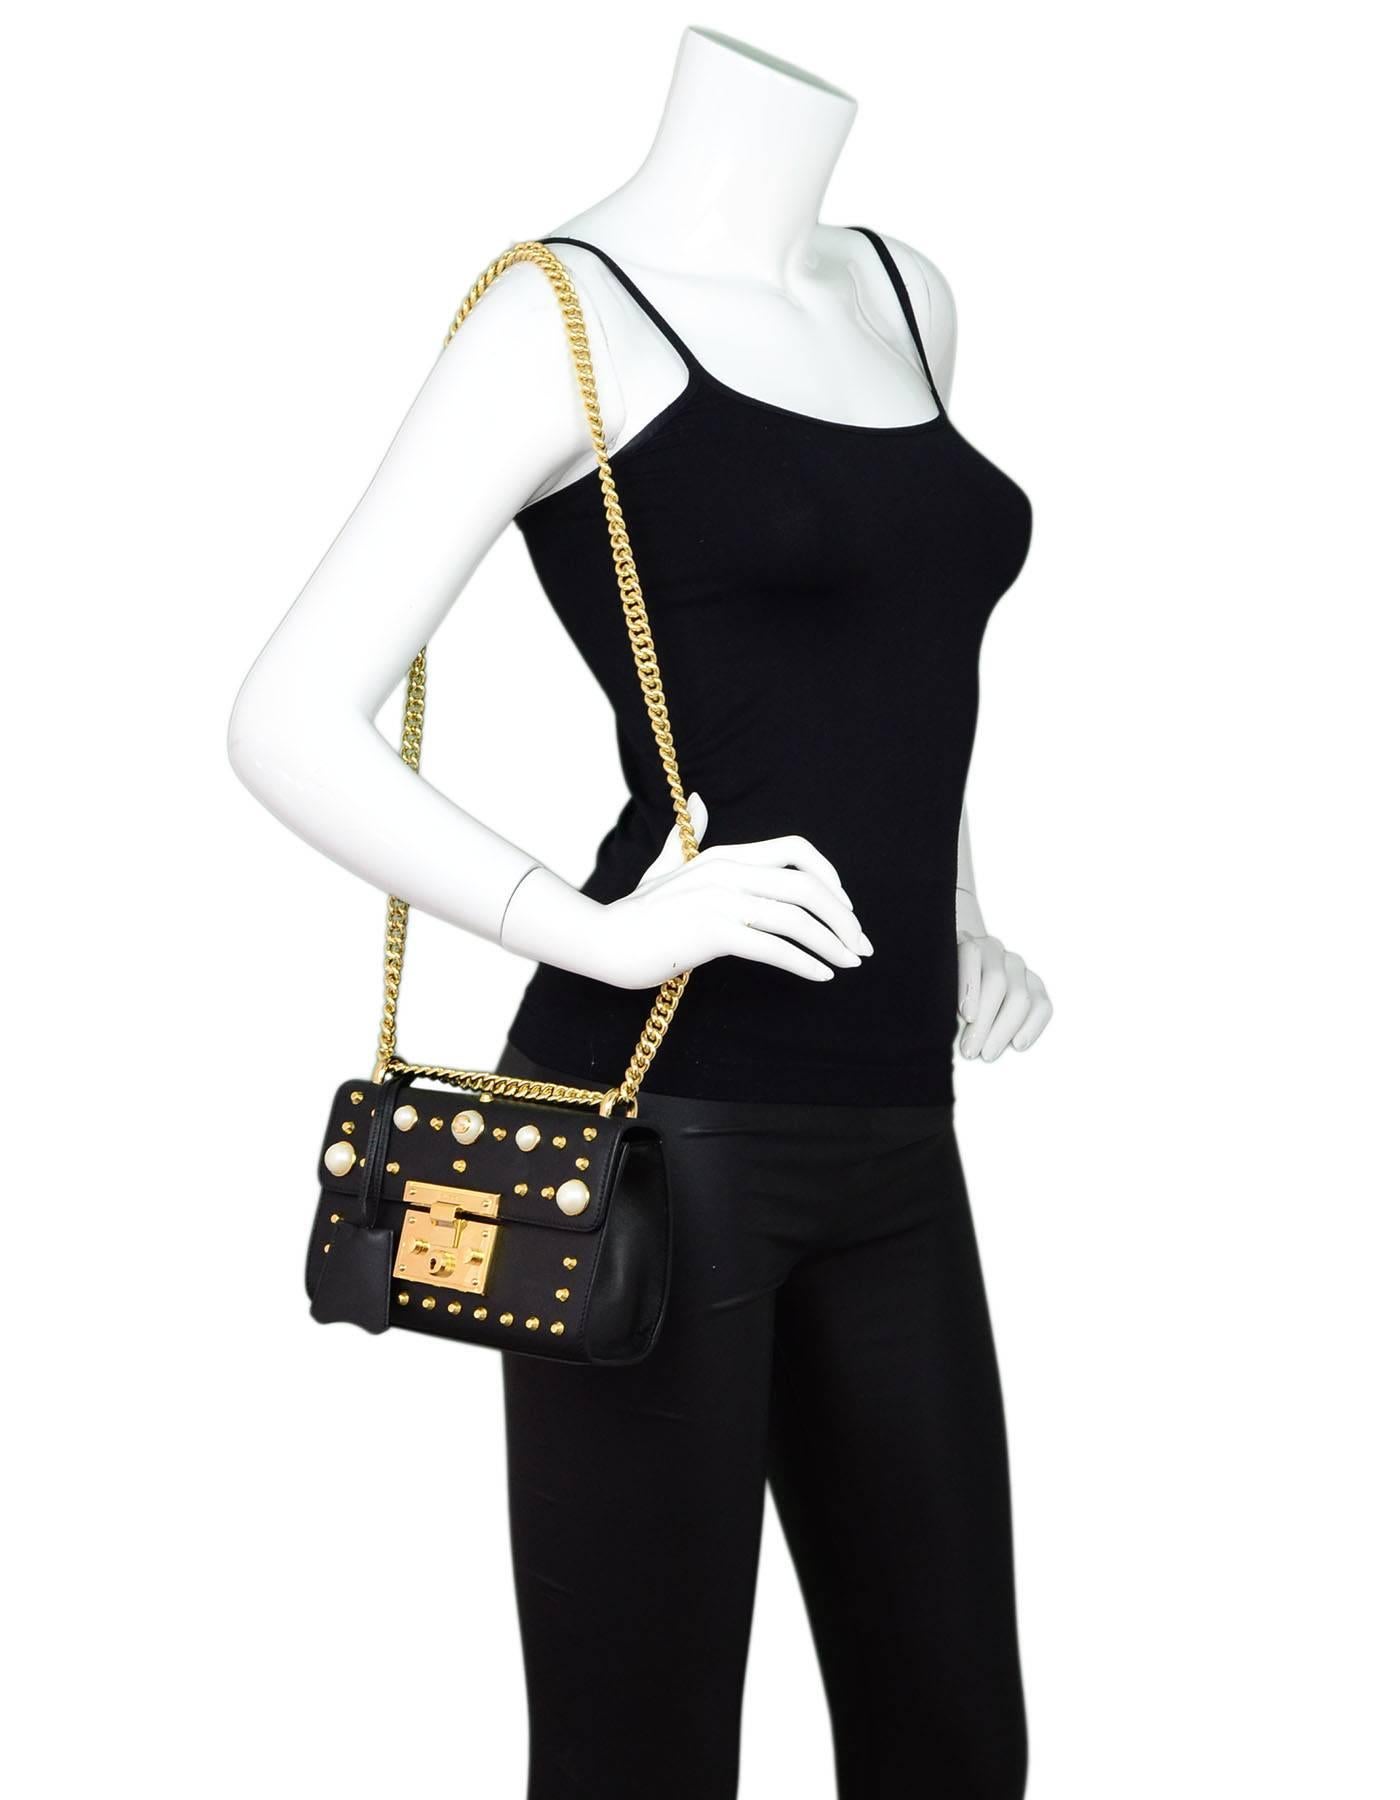 Gucci Black Leather & Faux Pearl Studded Padlock Shoulder Bag

Made In: Italy
Color: Black, gold, white
Hardware: Goldtone
Materials: Leather, faux pearl, metal
Lining: Beige suede
Closure/Opening: Flap top with push-lock
Exterior Pockets: